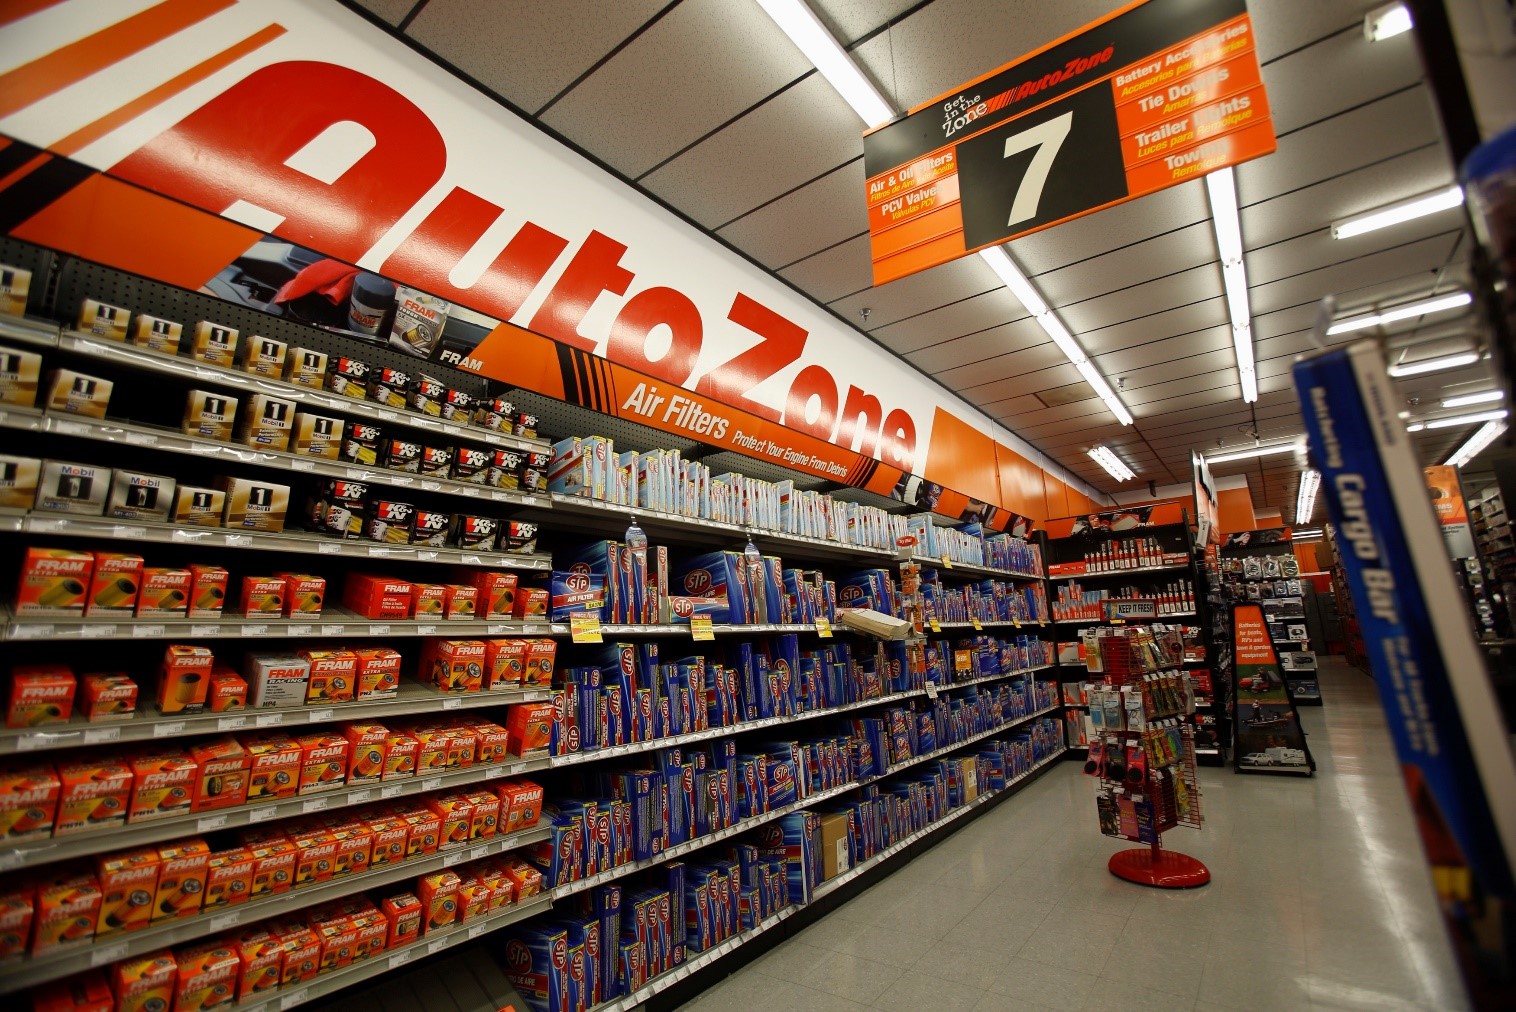 AutoZone Vs Amazon Can Warehouse Stores Still Compete With E-Commerce Giant-fig 2 Image